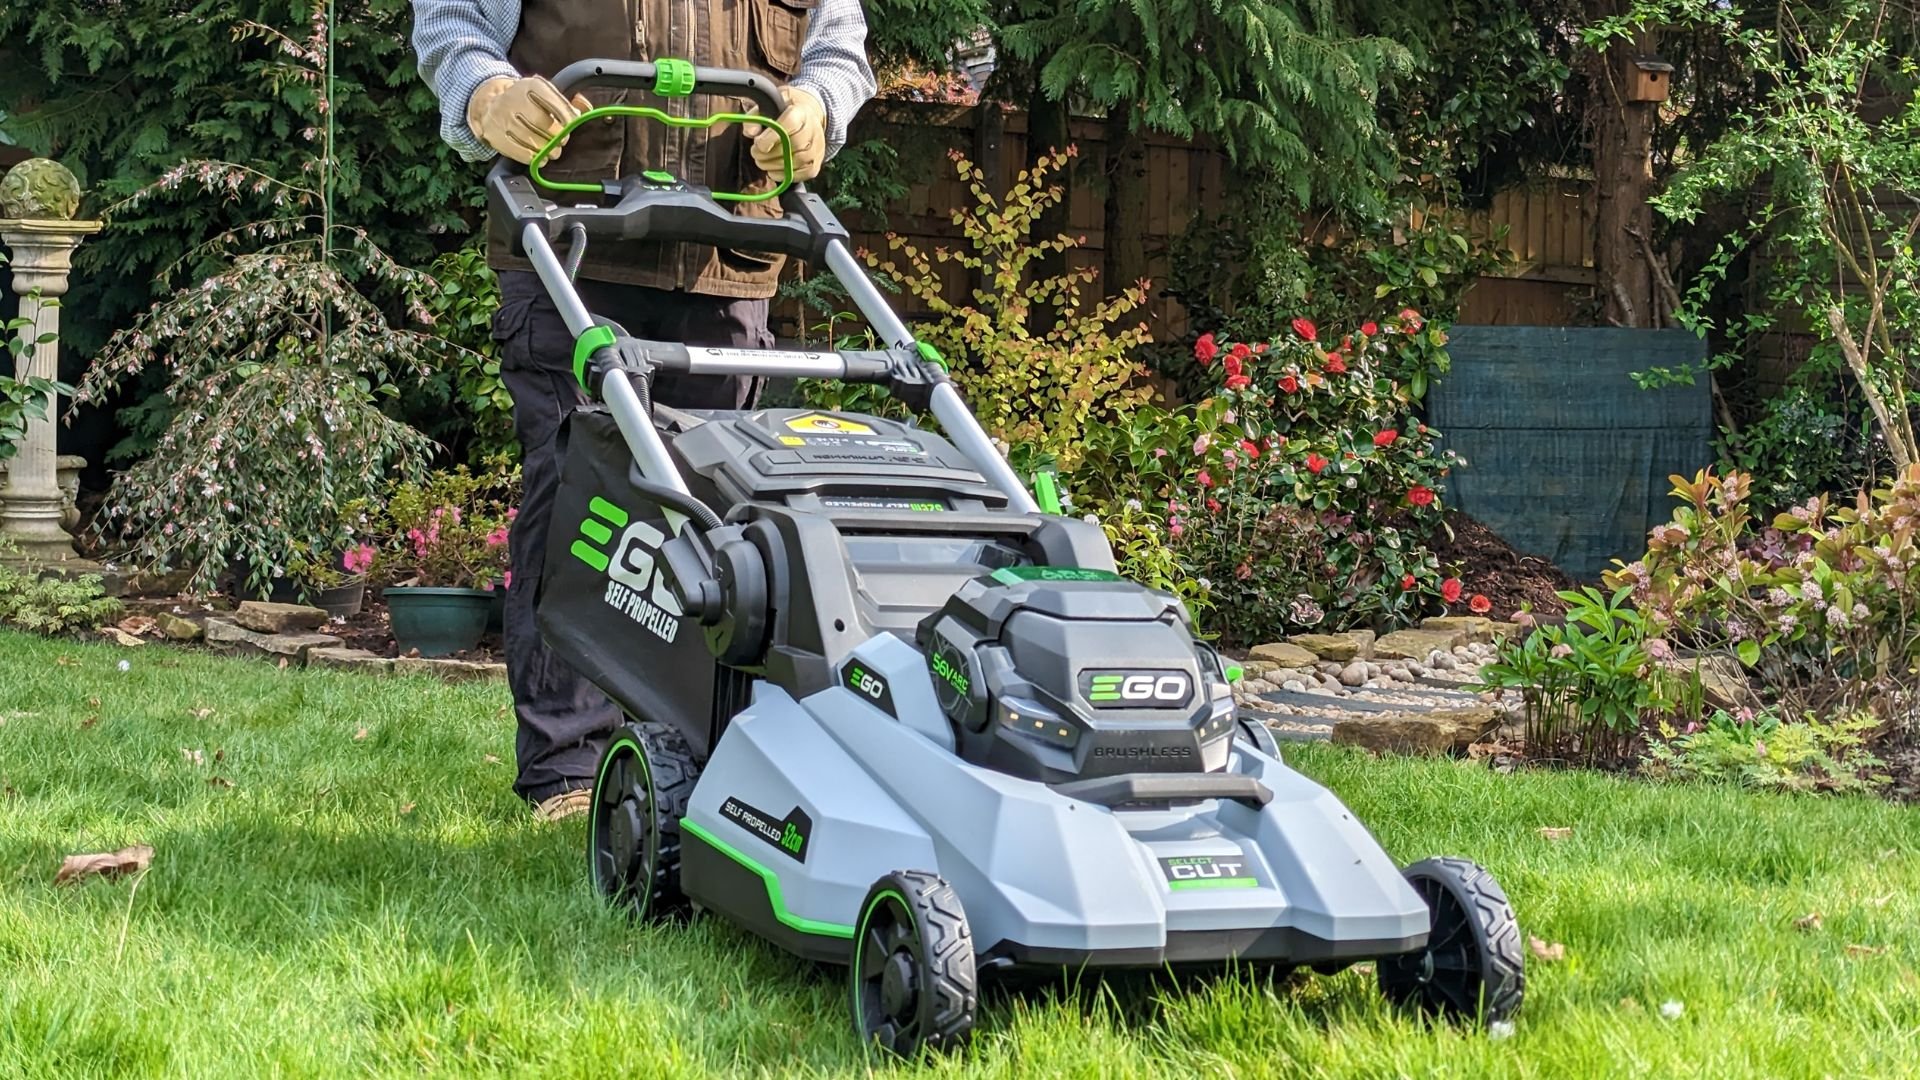 Grass guzzlers: Homeowners look at lawnmowers in whole new light